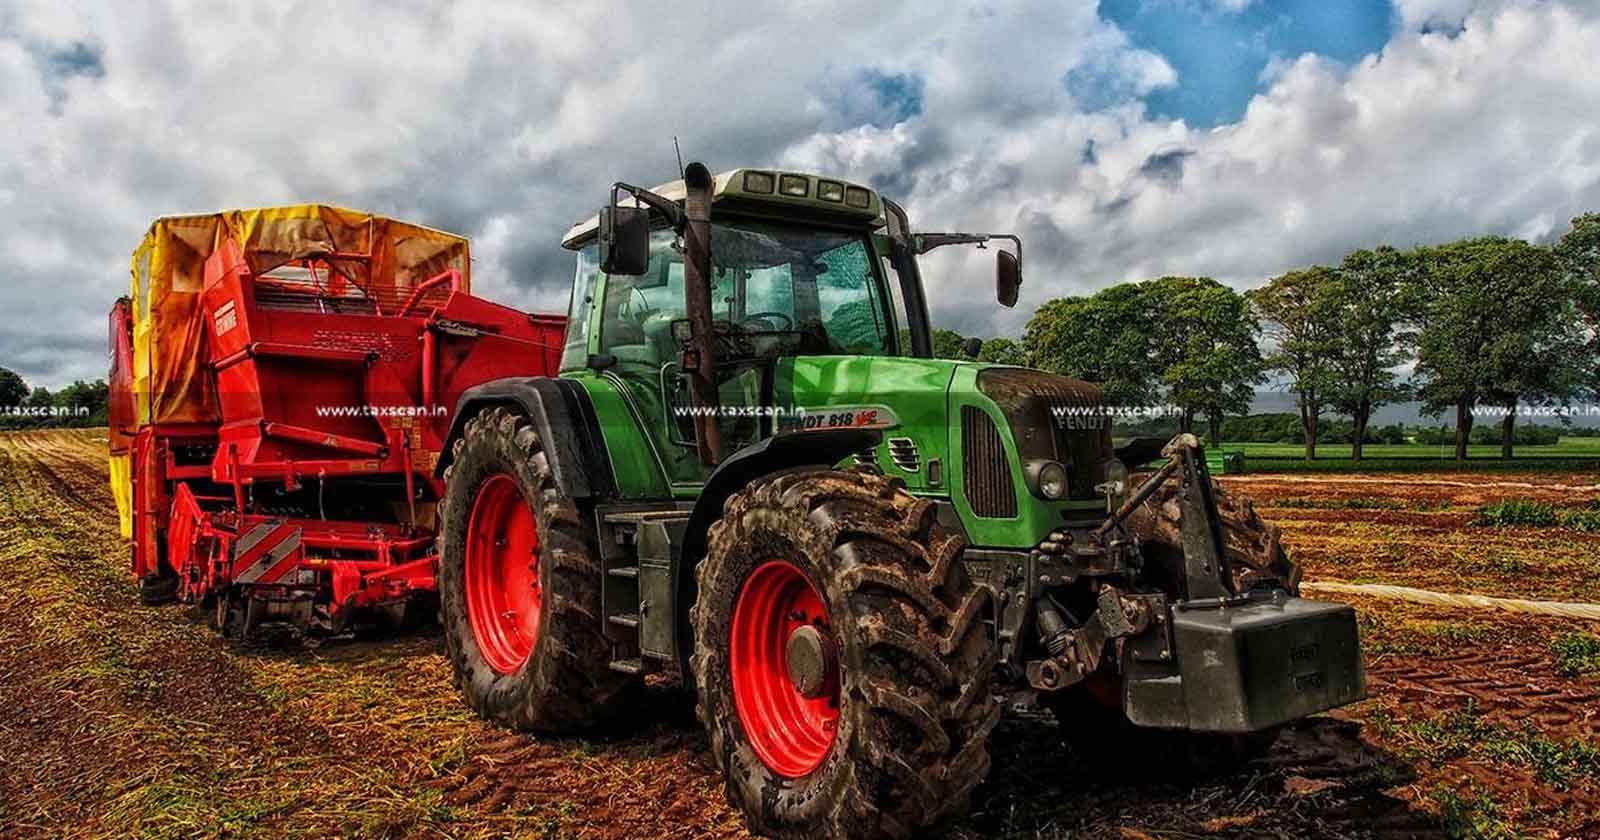 Appointment of Tractor Driver - Appointment - Tractor Driver - Appointment of Tractor Driver based on Agreement - Agreement - CESTAT - Service Tax Demand - taxscan